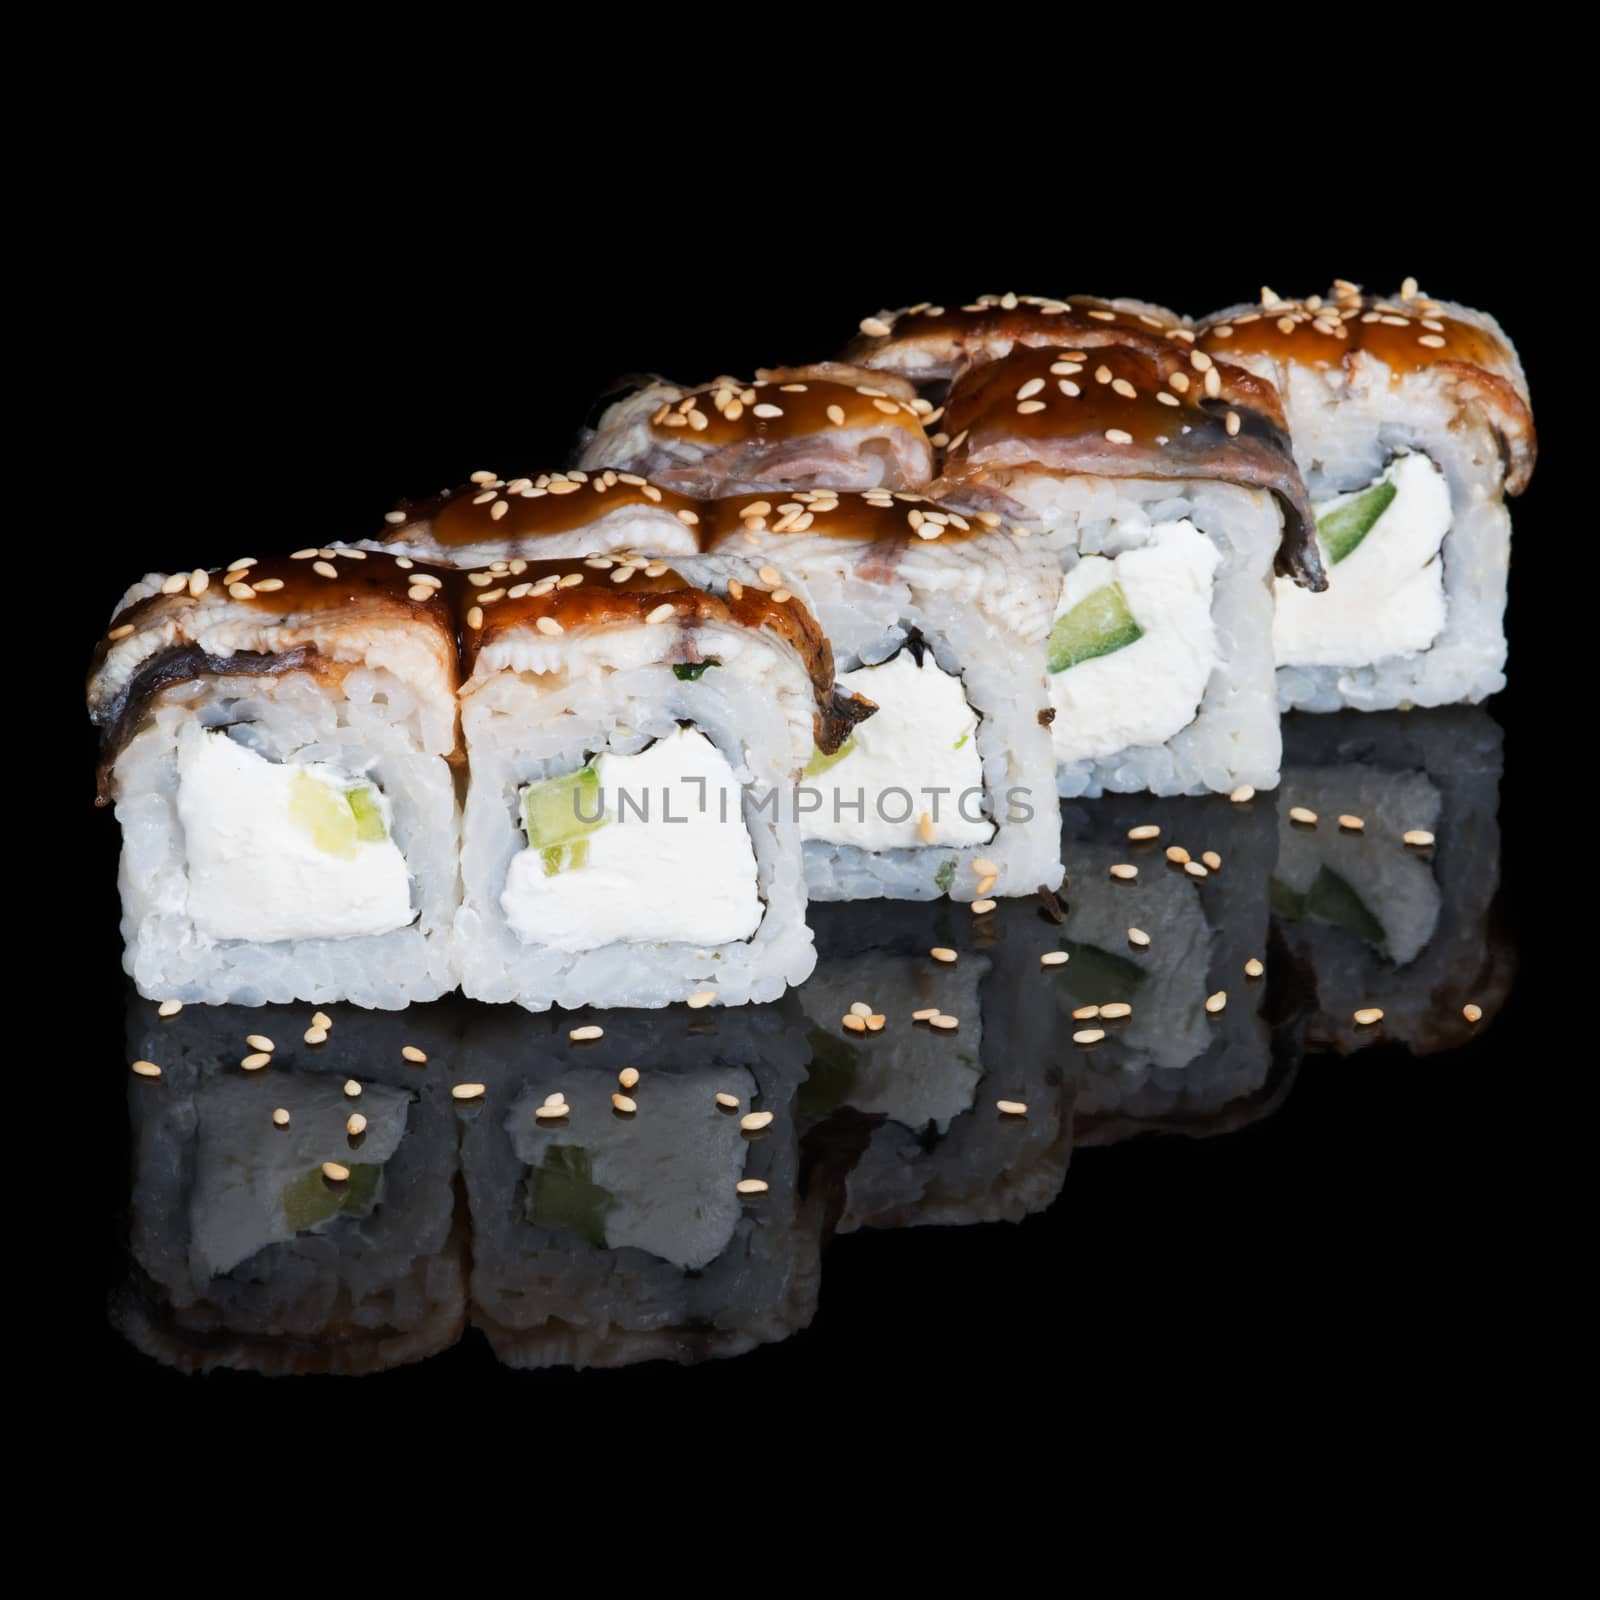 Sushi rolls with eel, cucumber and soft cheese on black background